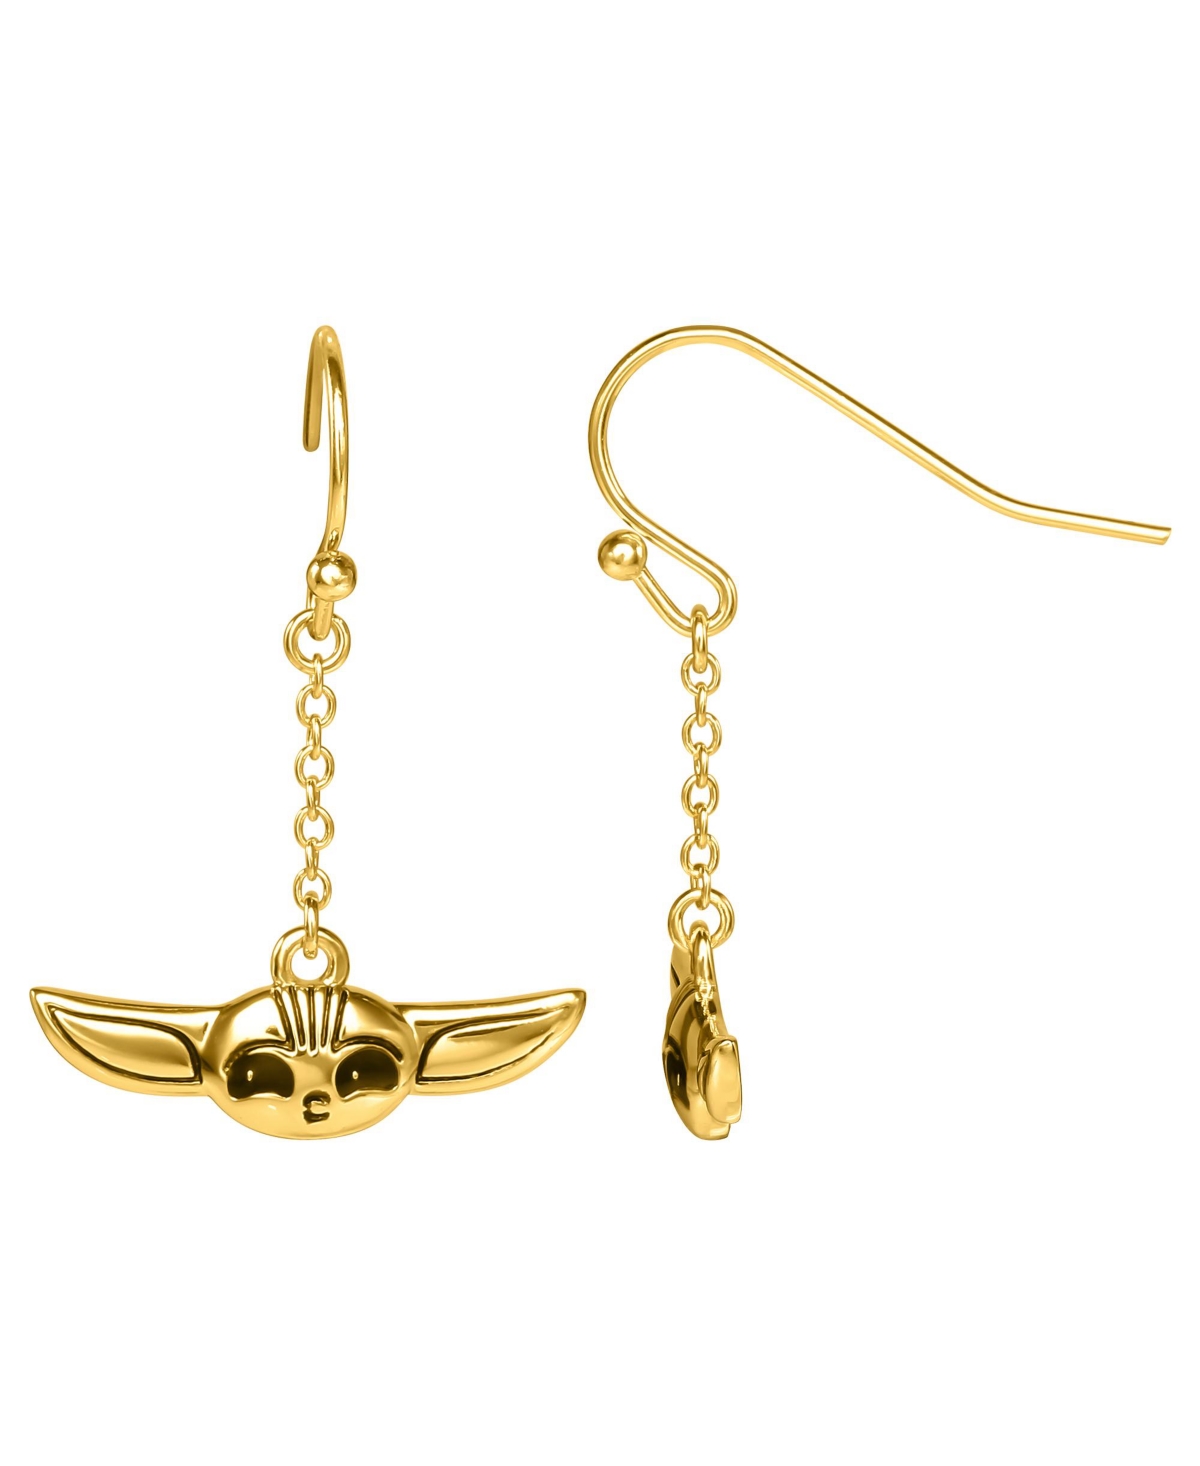 Disney Star Wars The Mandalorian Grogu Gold Plated Dangle Earrings, Officially Licensed - Gold one, black